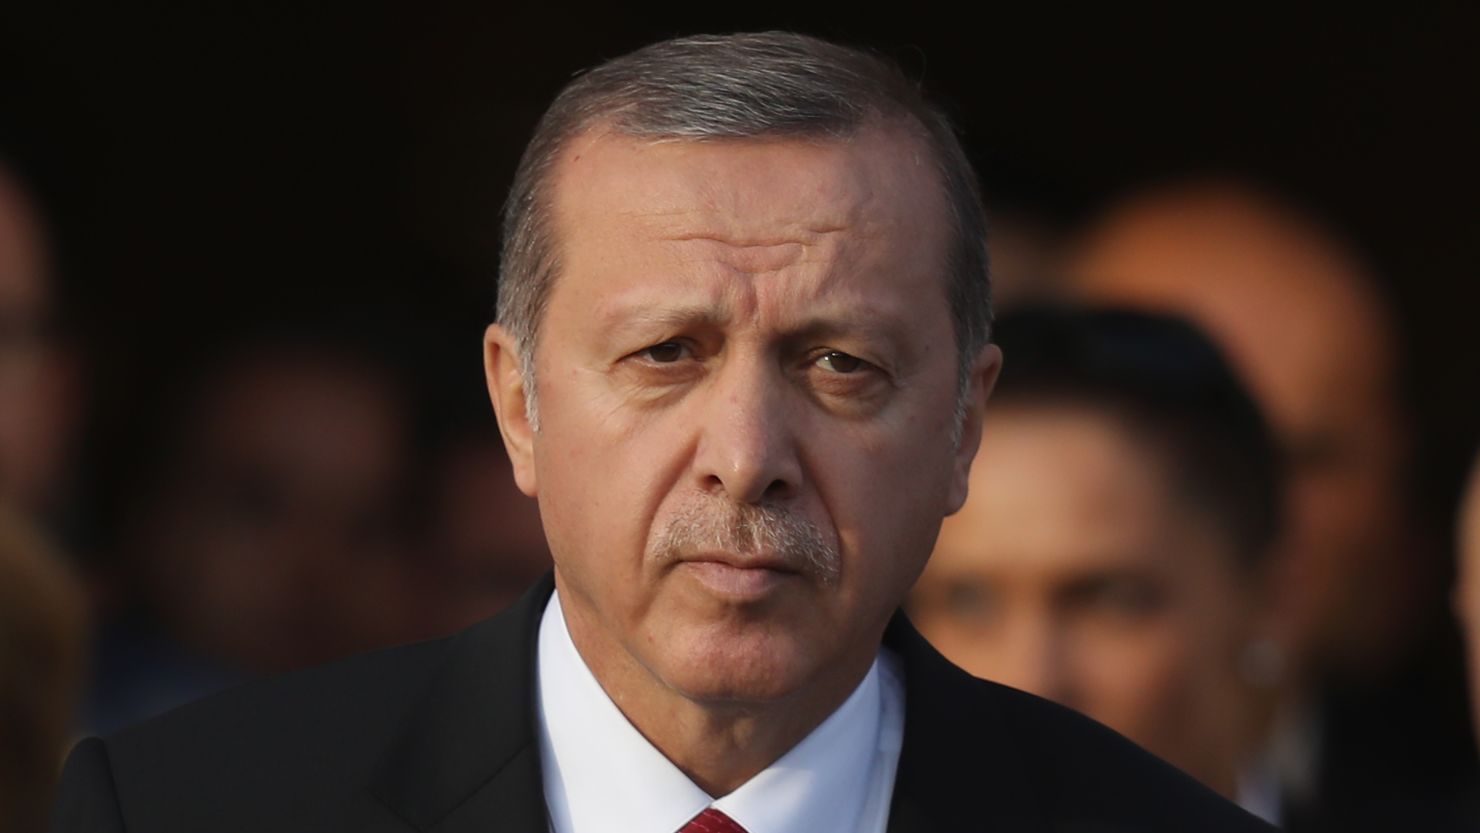 A crackdown led by Turkish President Recep Tayyip Erdogan, pictured at a NATO summit in July, has worried many in the European Union.